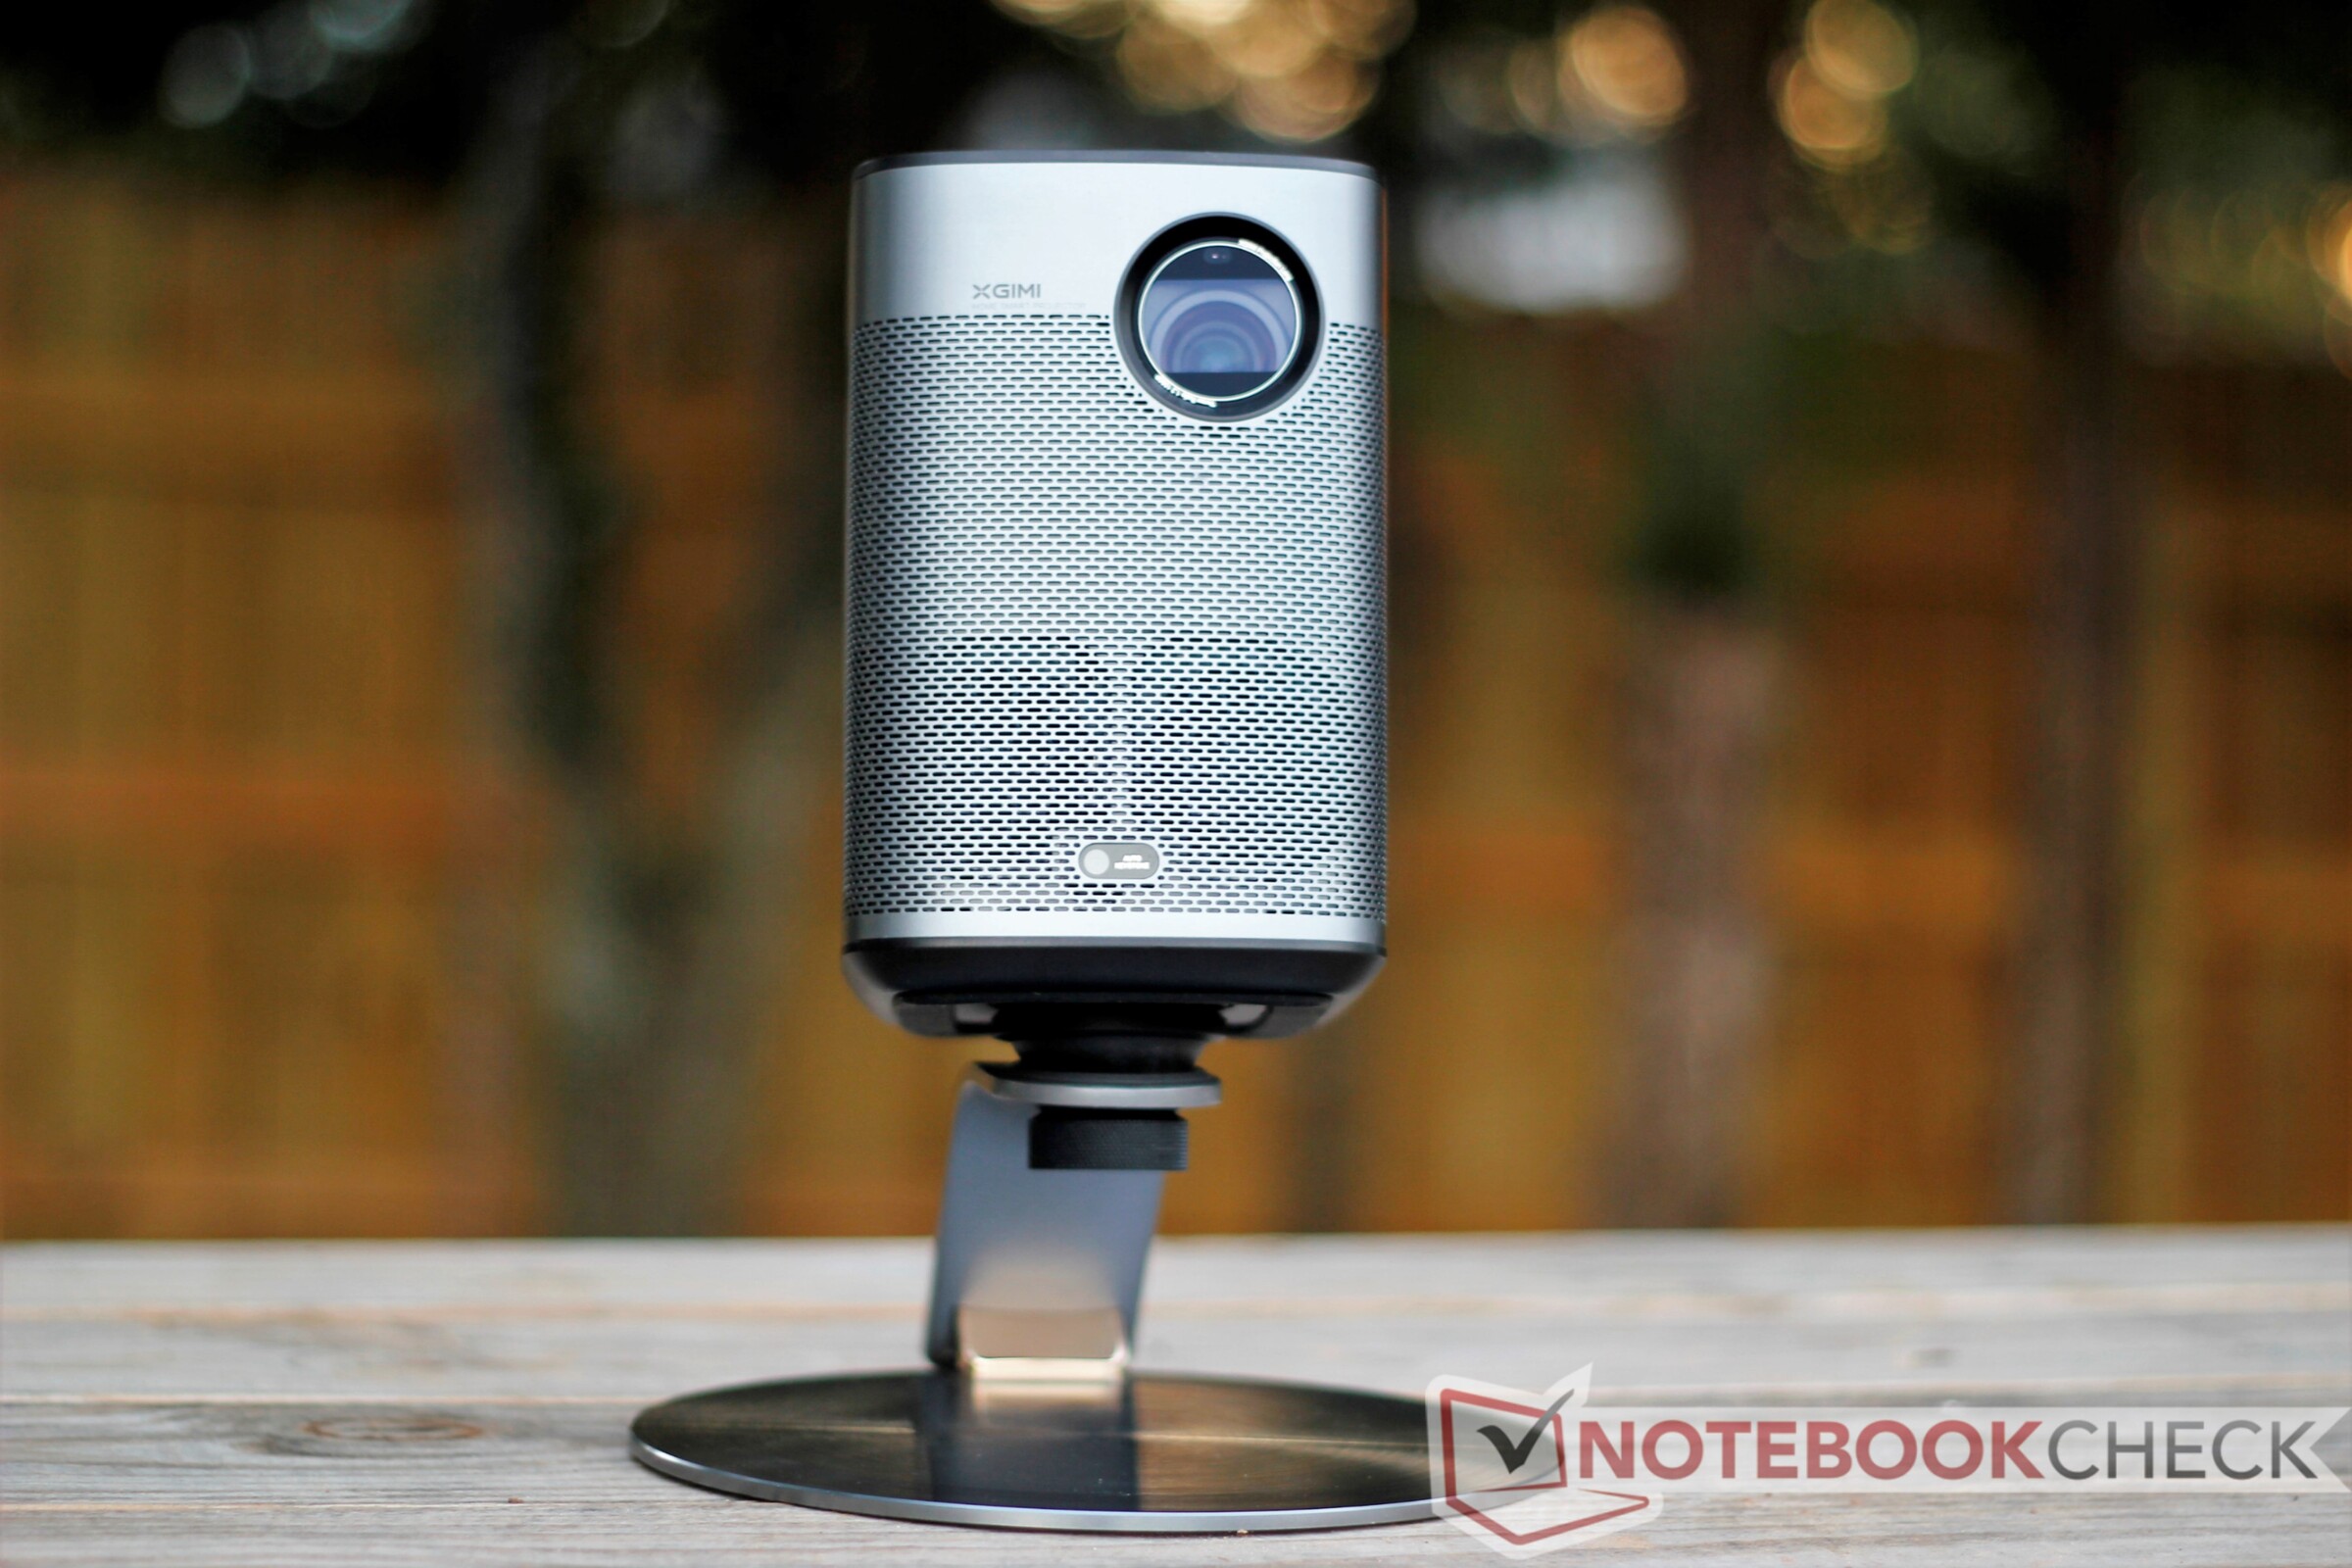 Xgimi Halo portable projector review